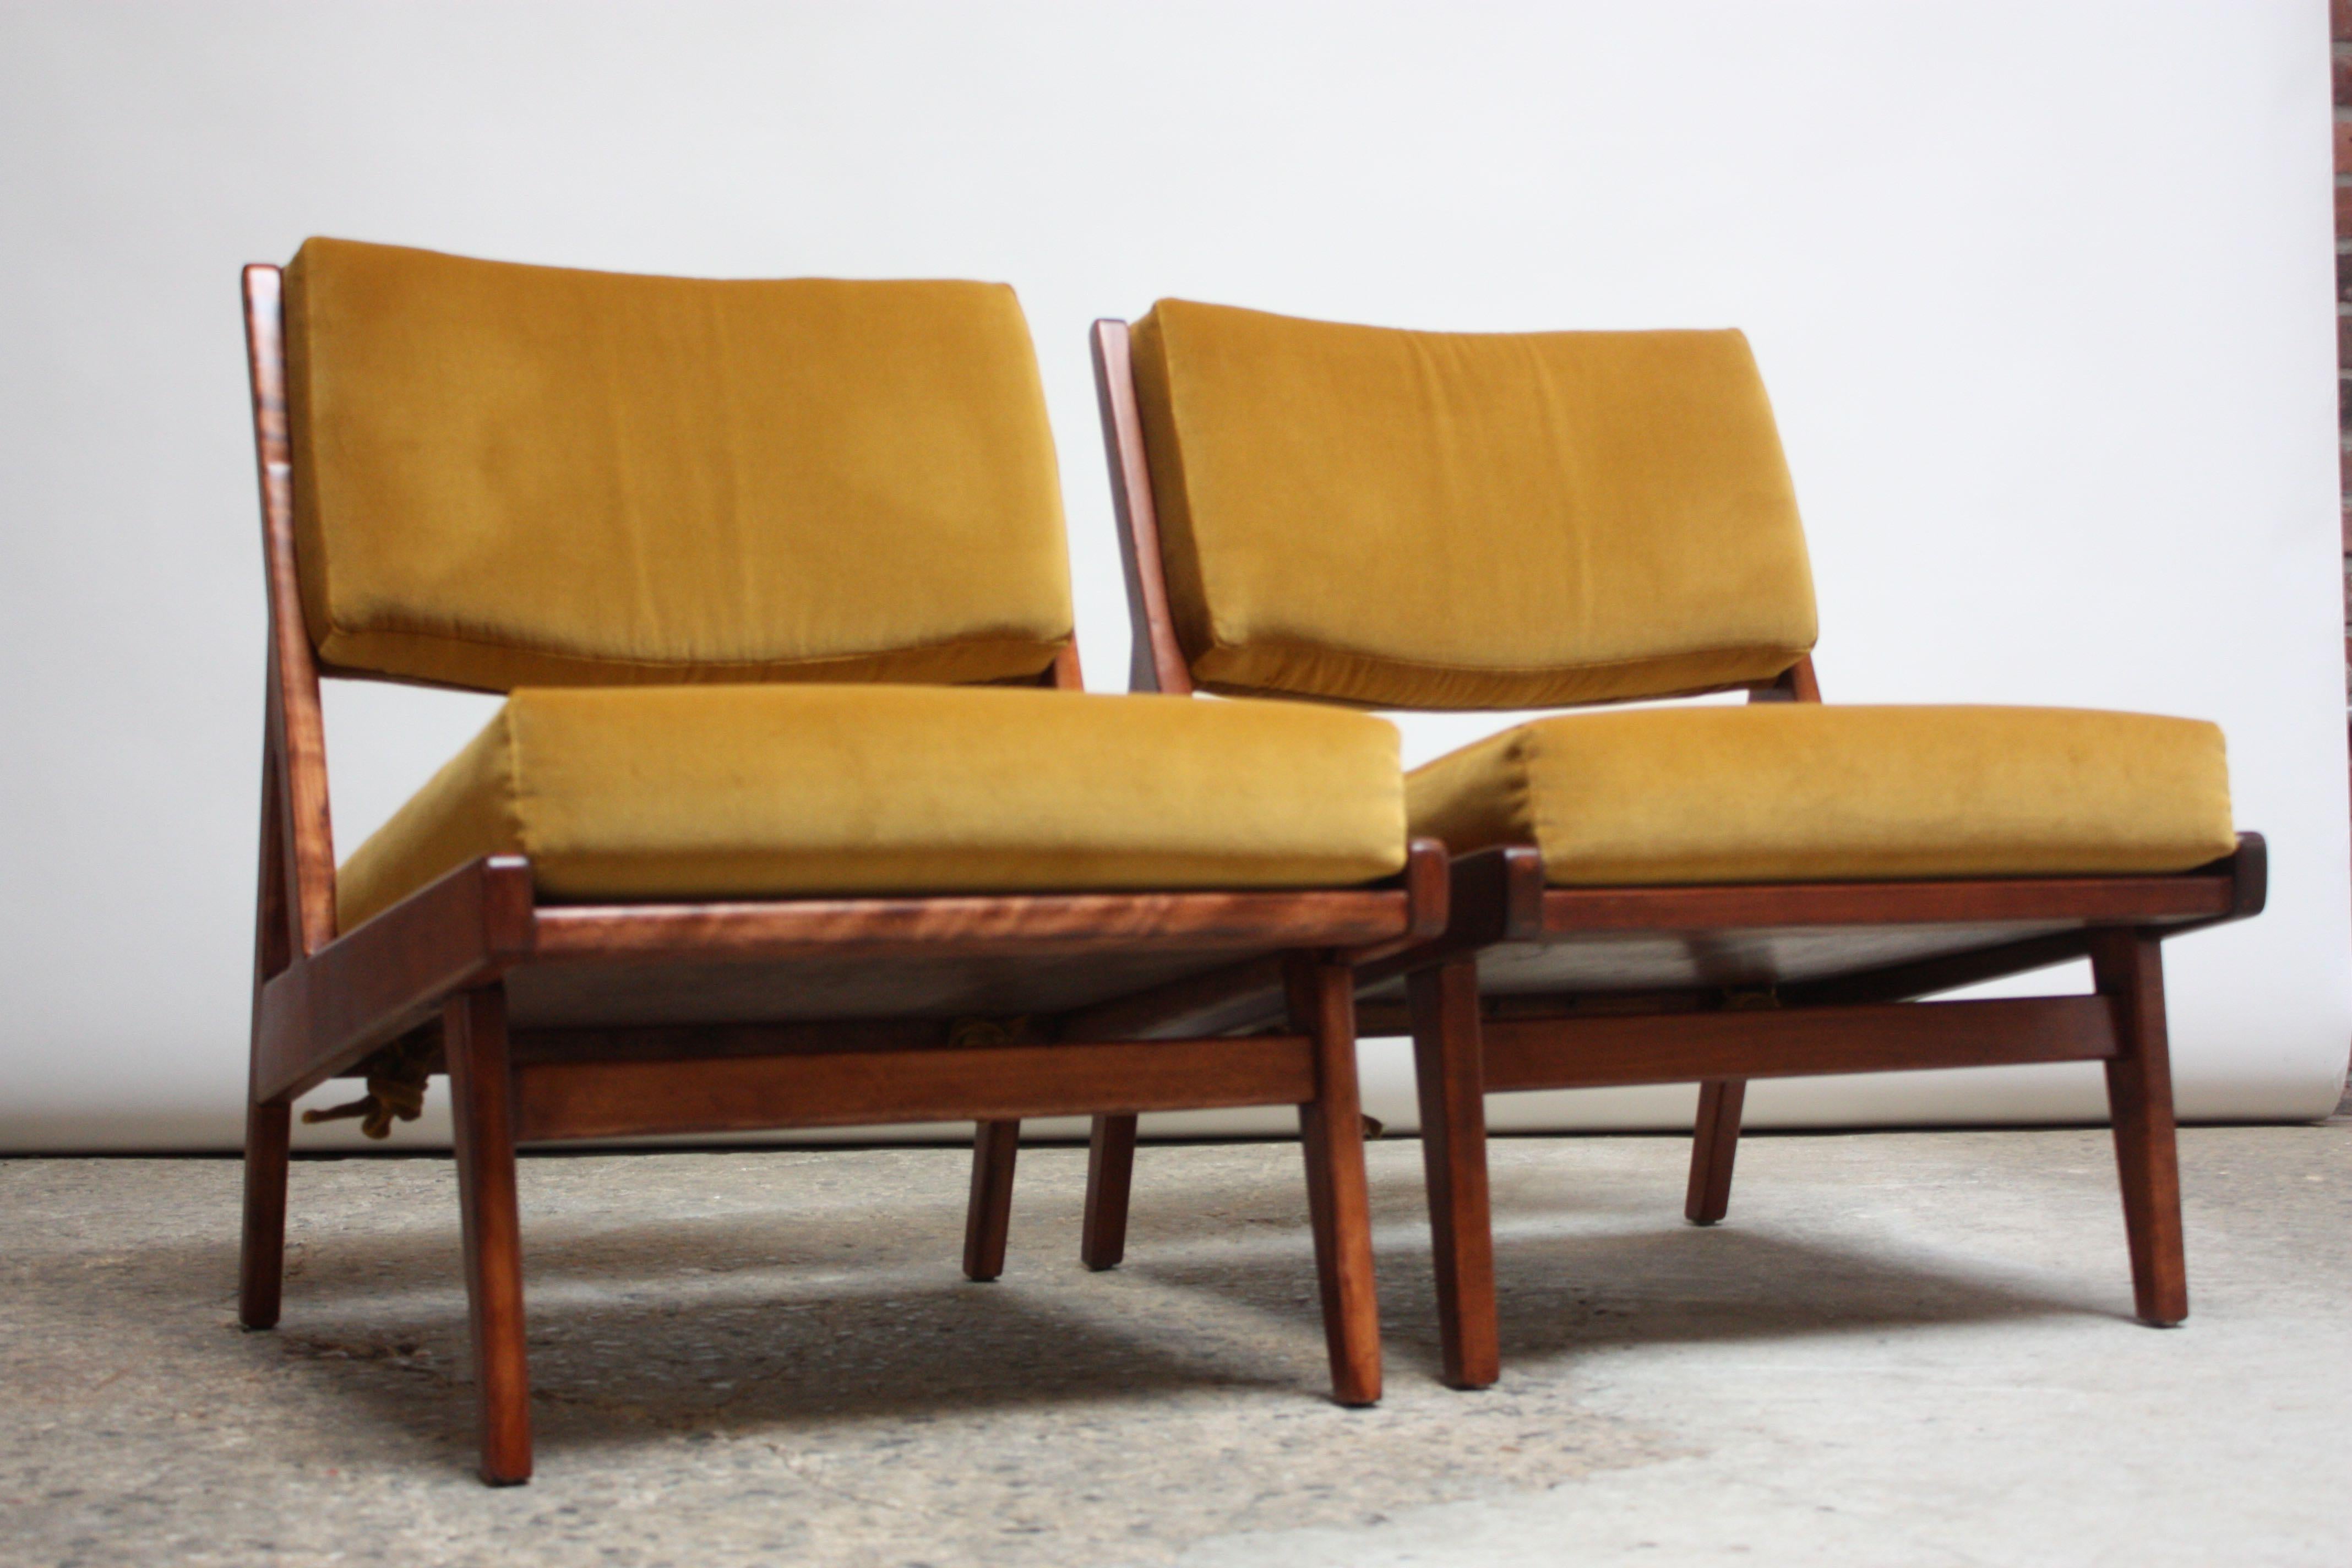 American Pair of Jens Risom Low Lounge Chairs Model U-431 in Walnut and Velvet